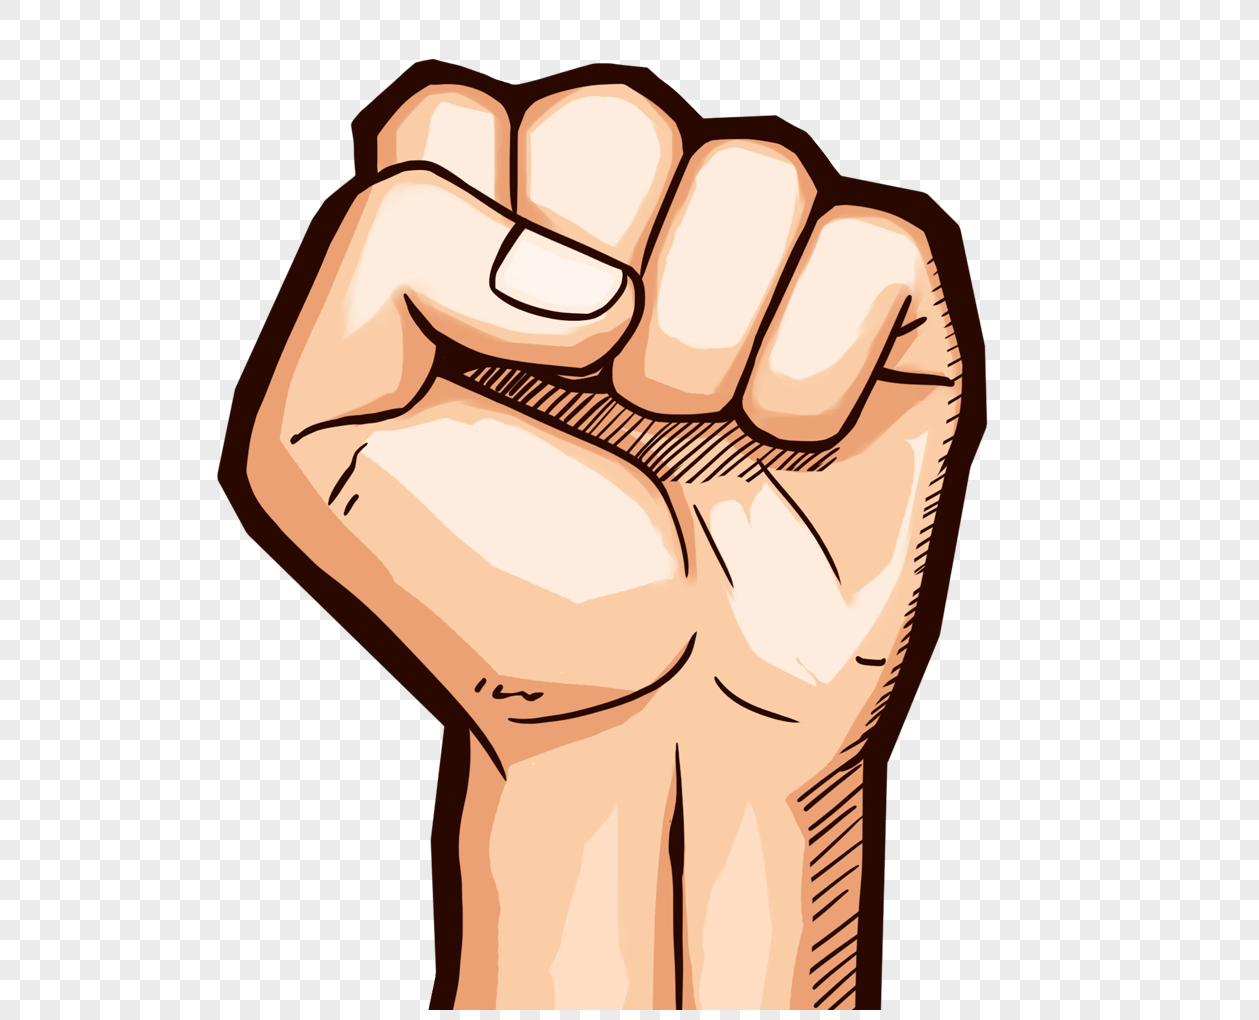 Cartoon fist png image_picture free download 400228278_lovepik.com